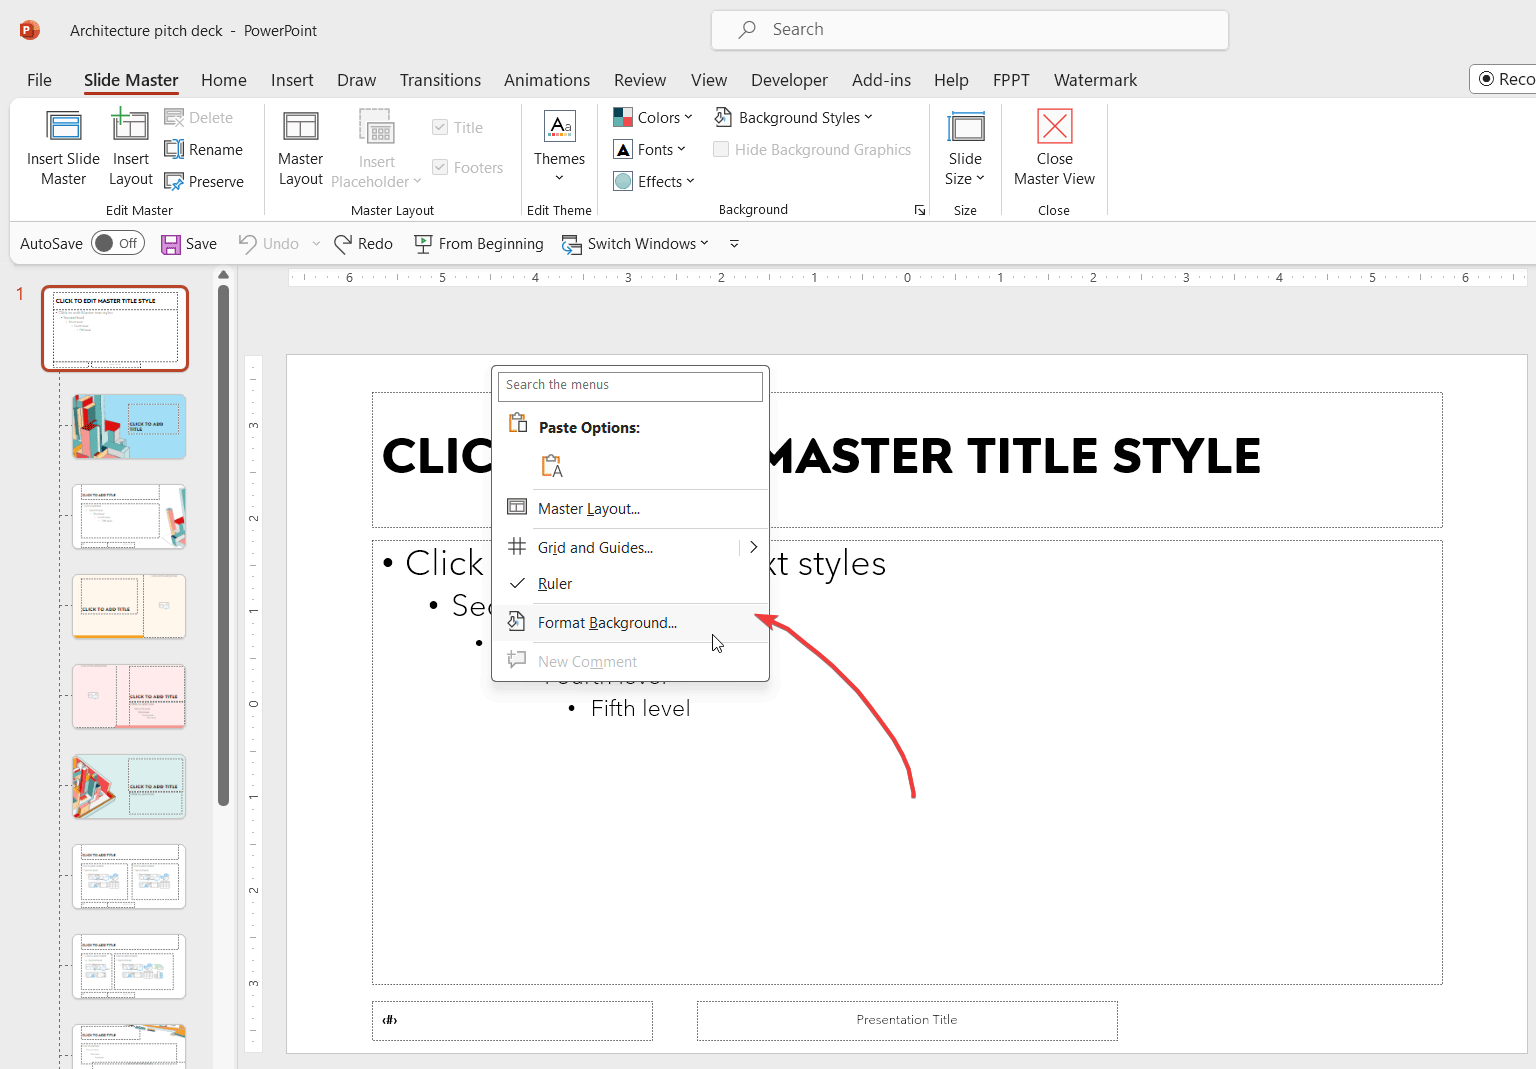 How to change the background color in PowerPoint using Slide Master view.